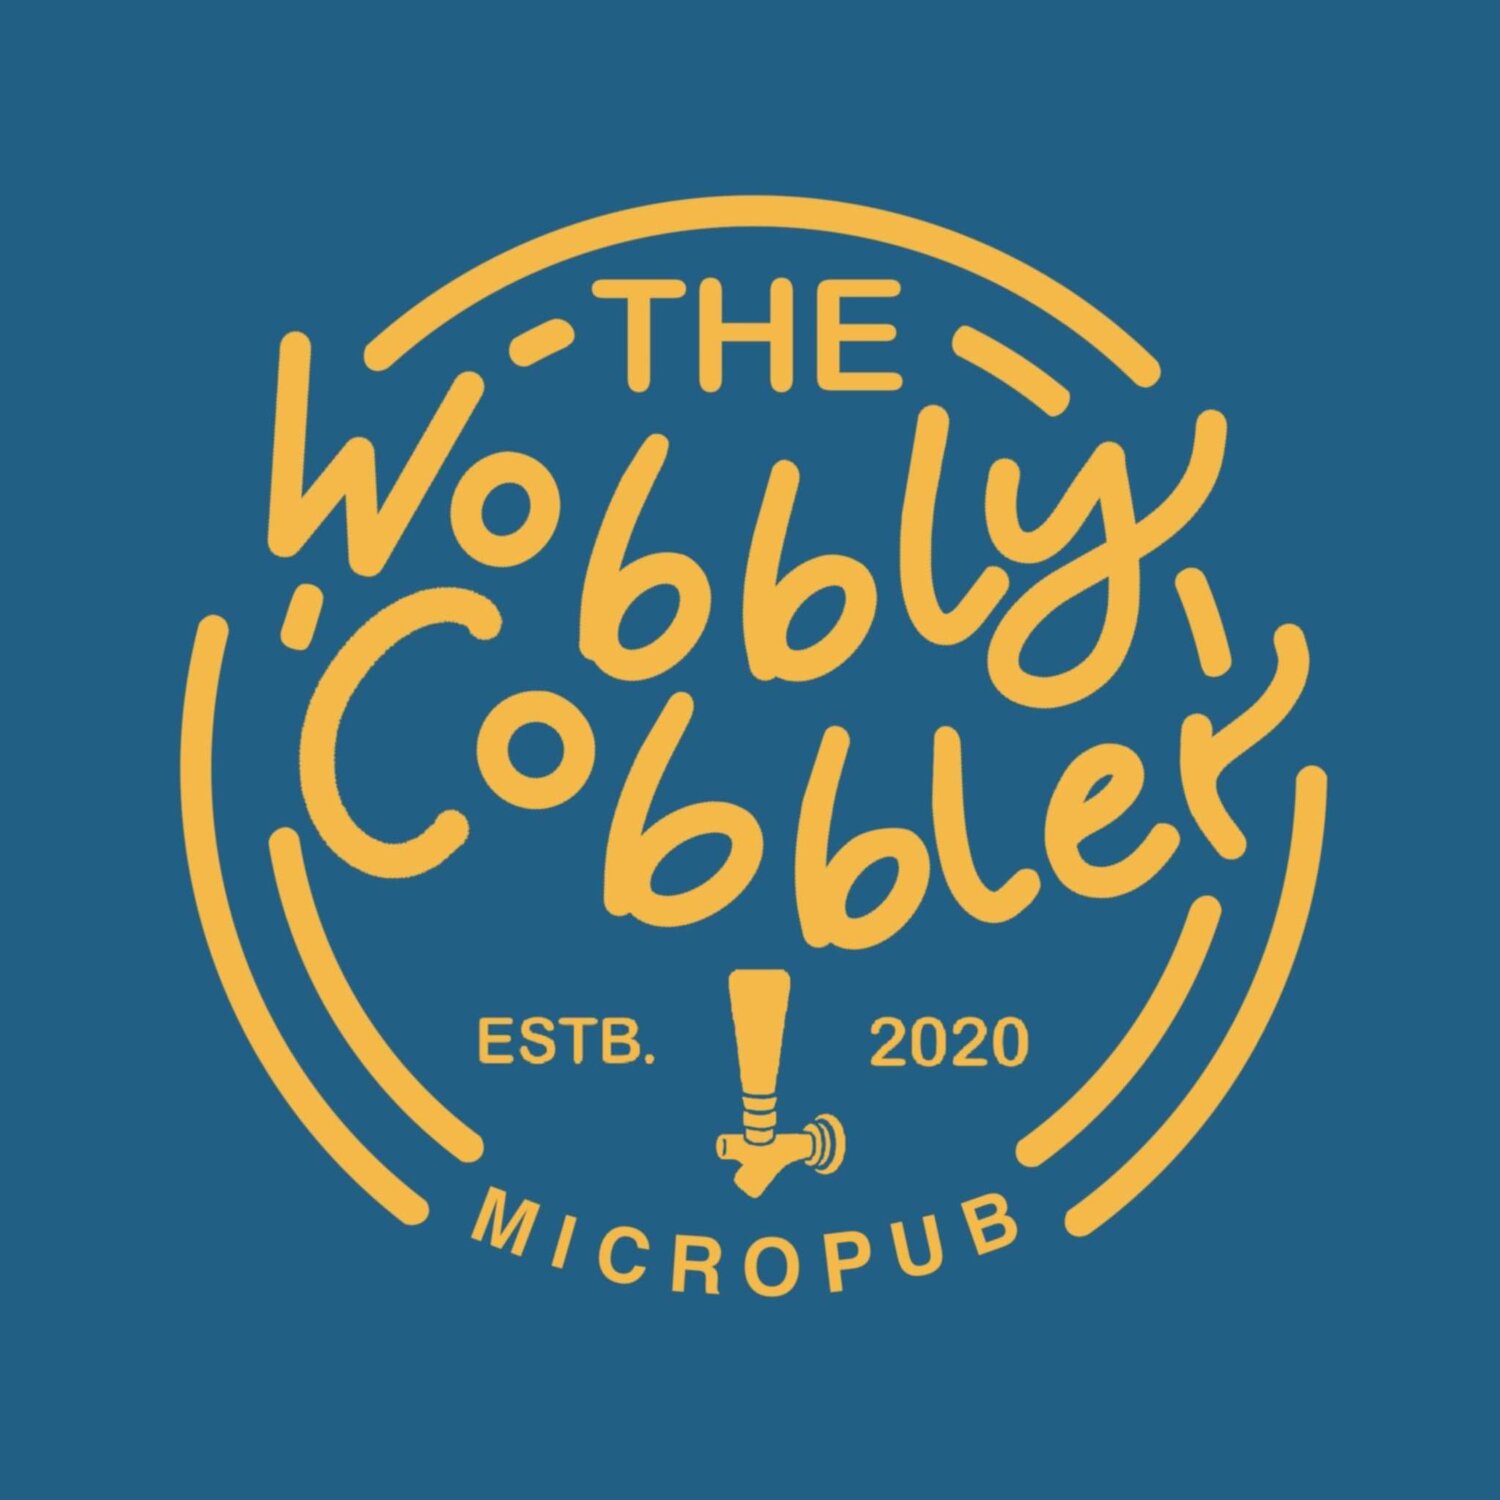 The Wobbly Cobbler